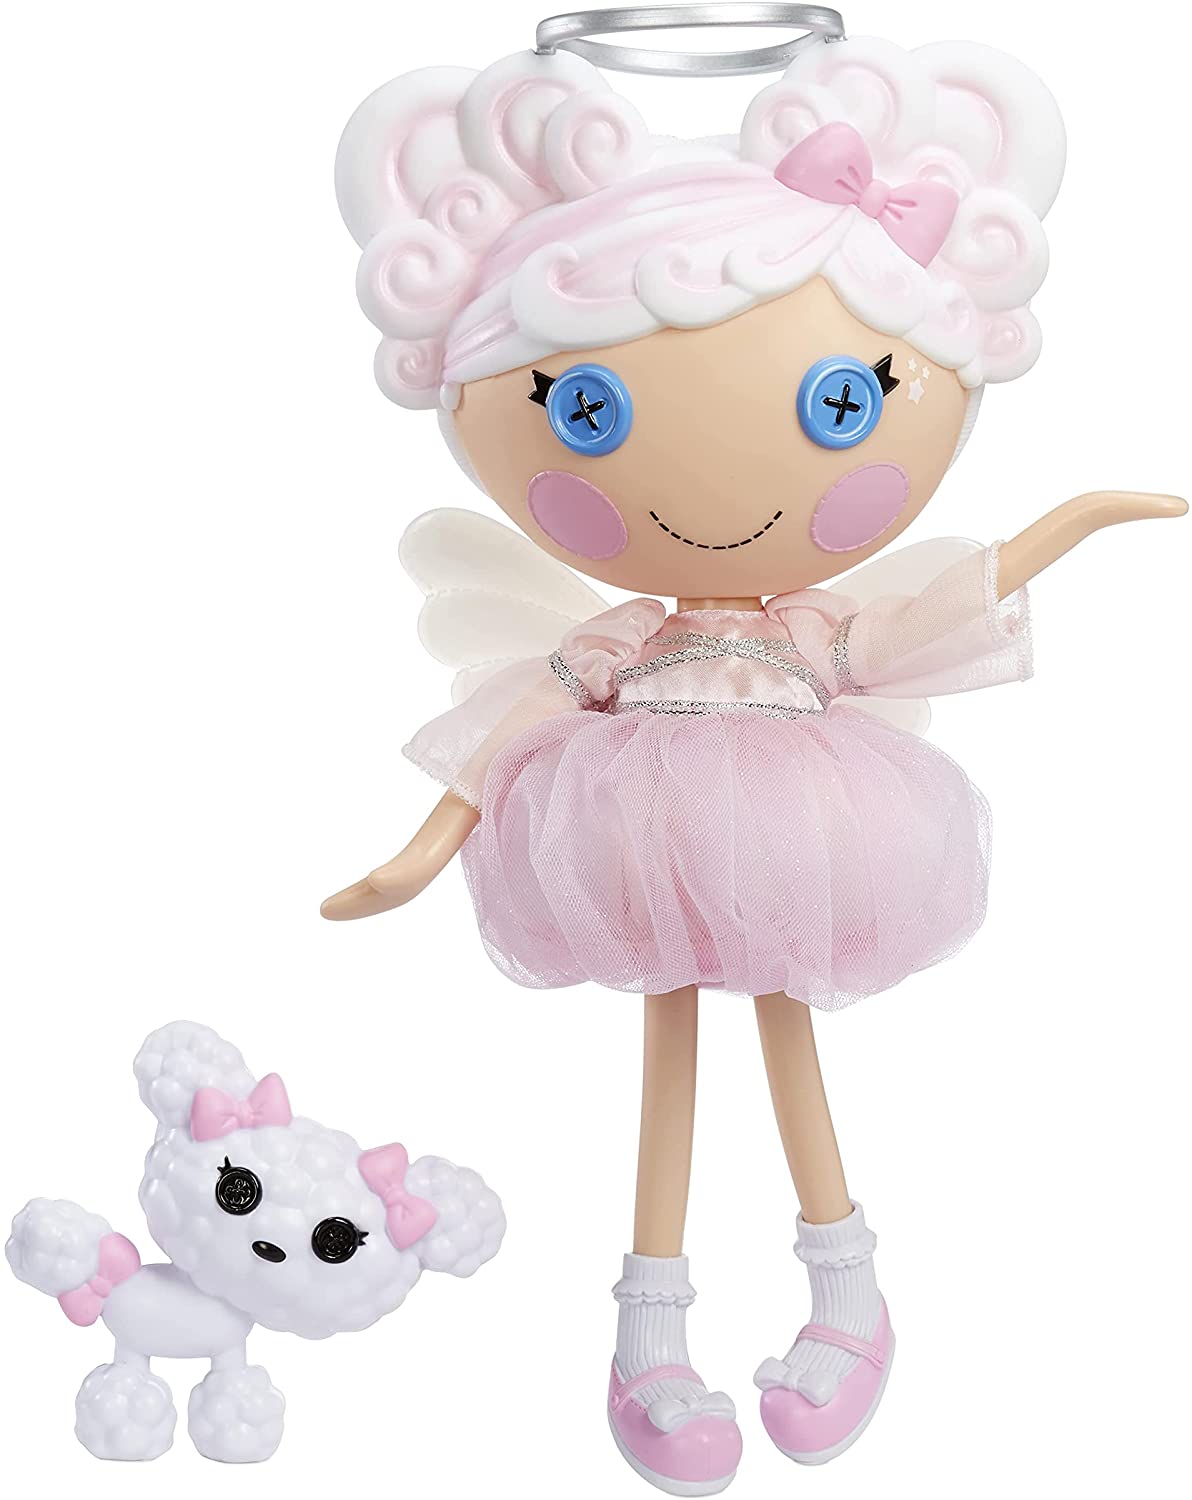 13" Lalaloopsy Doll: Cloud E. Sky & Pet Poodle $7.10 & More + Free Shipping w/ Amazon Prime or Orders $25+